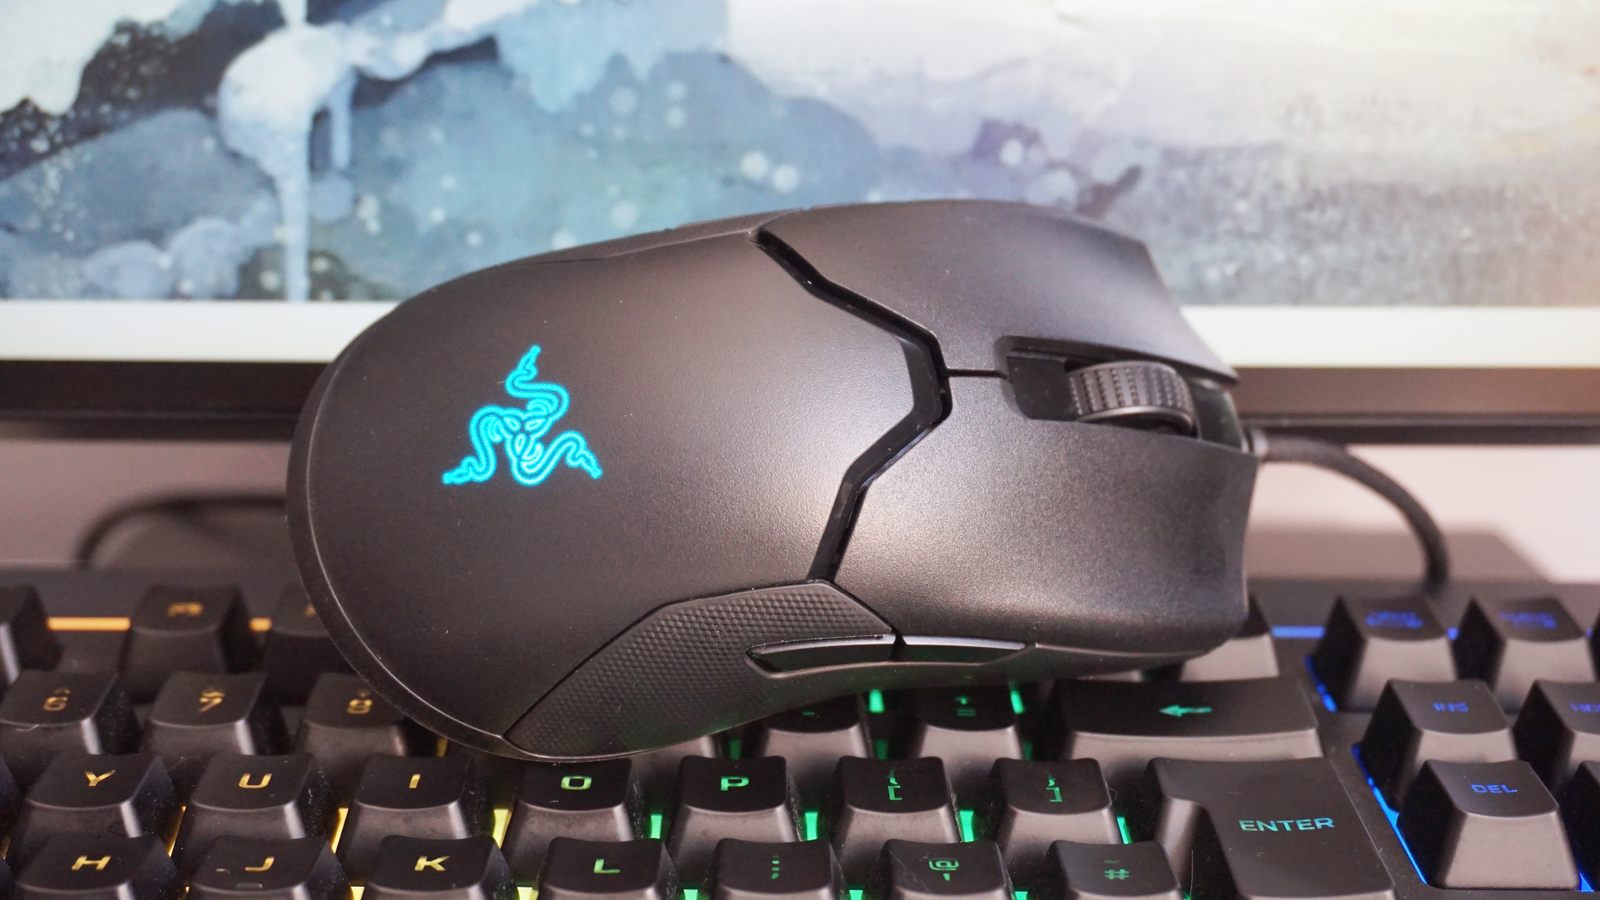 Razer Viper review: An ultralight ambidextrous gaming mouse